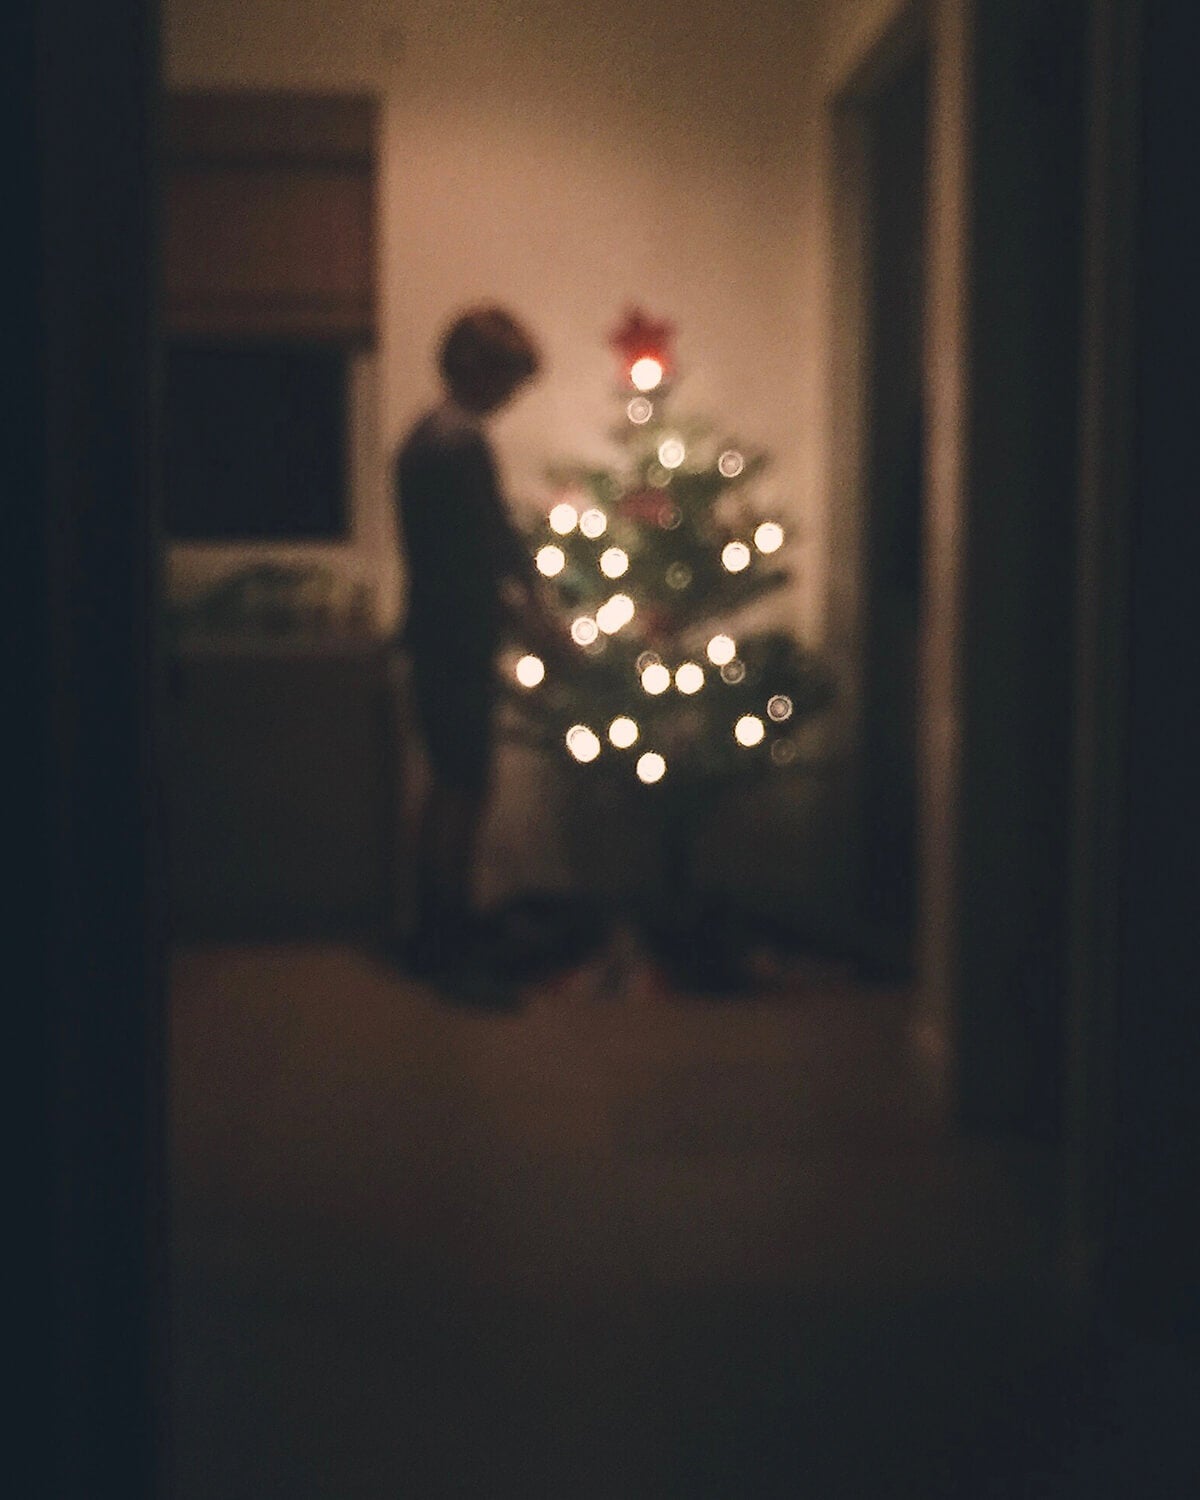 Blurry image of boy standing next to tree in the dim light of the glow from the string lights